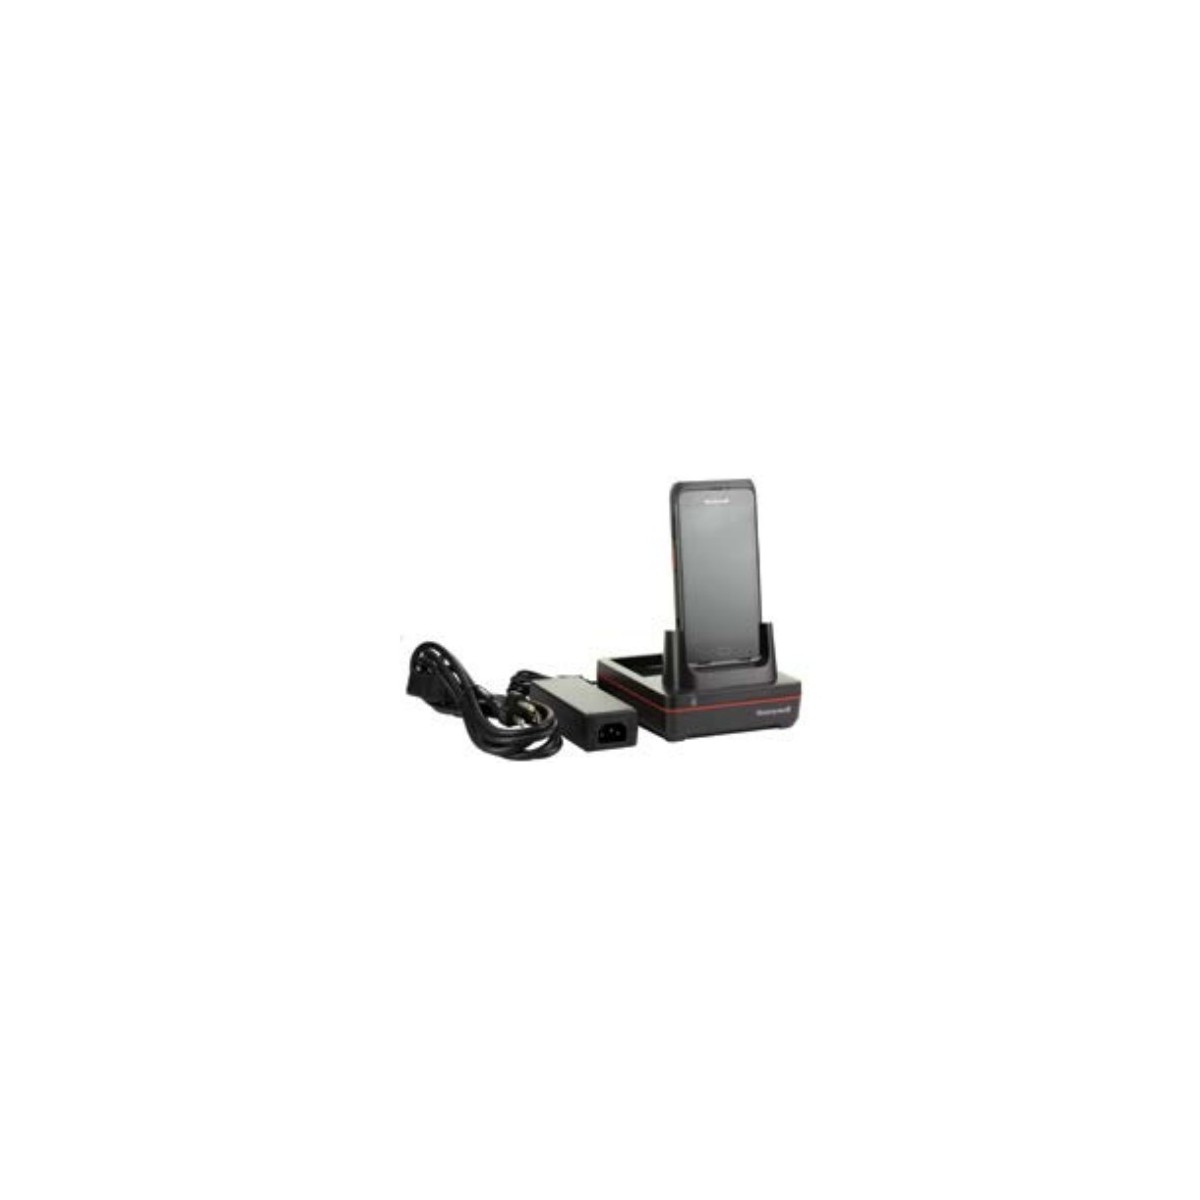 HONEYWELL CT40 non-booted homebase Kit - Pda Accessories